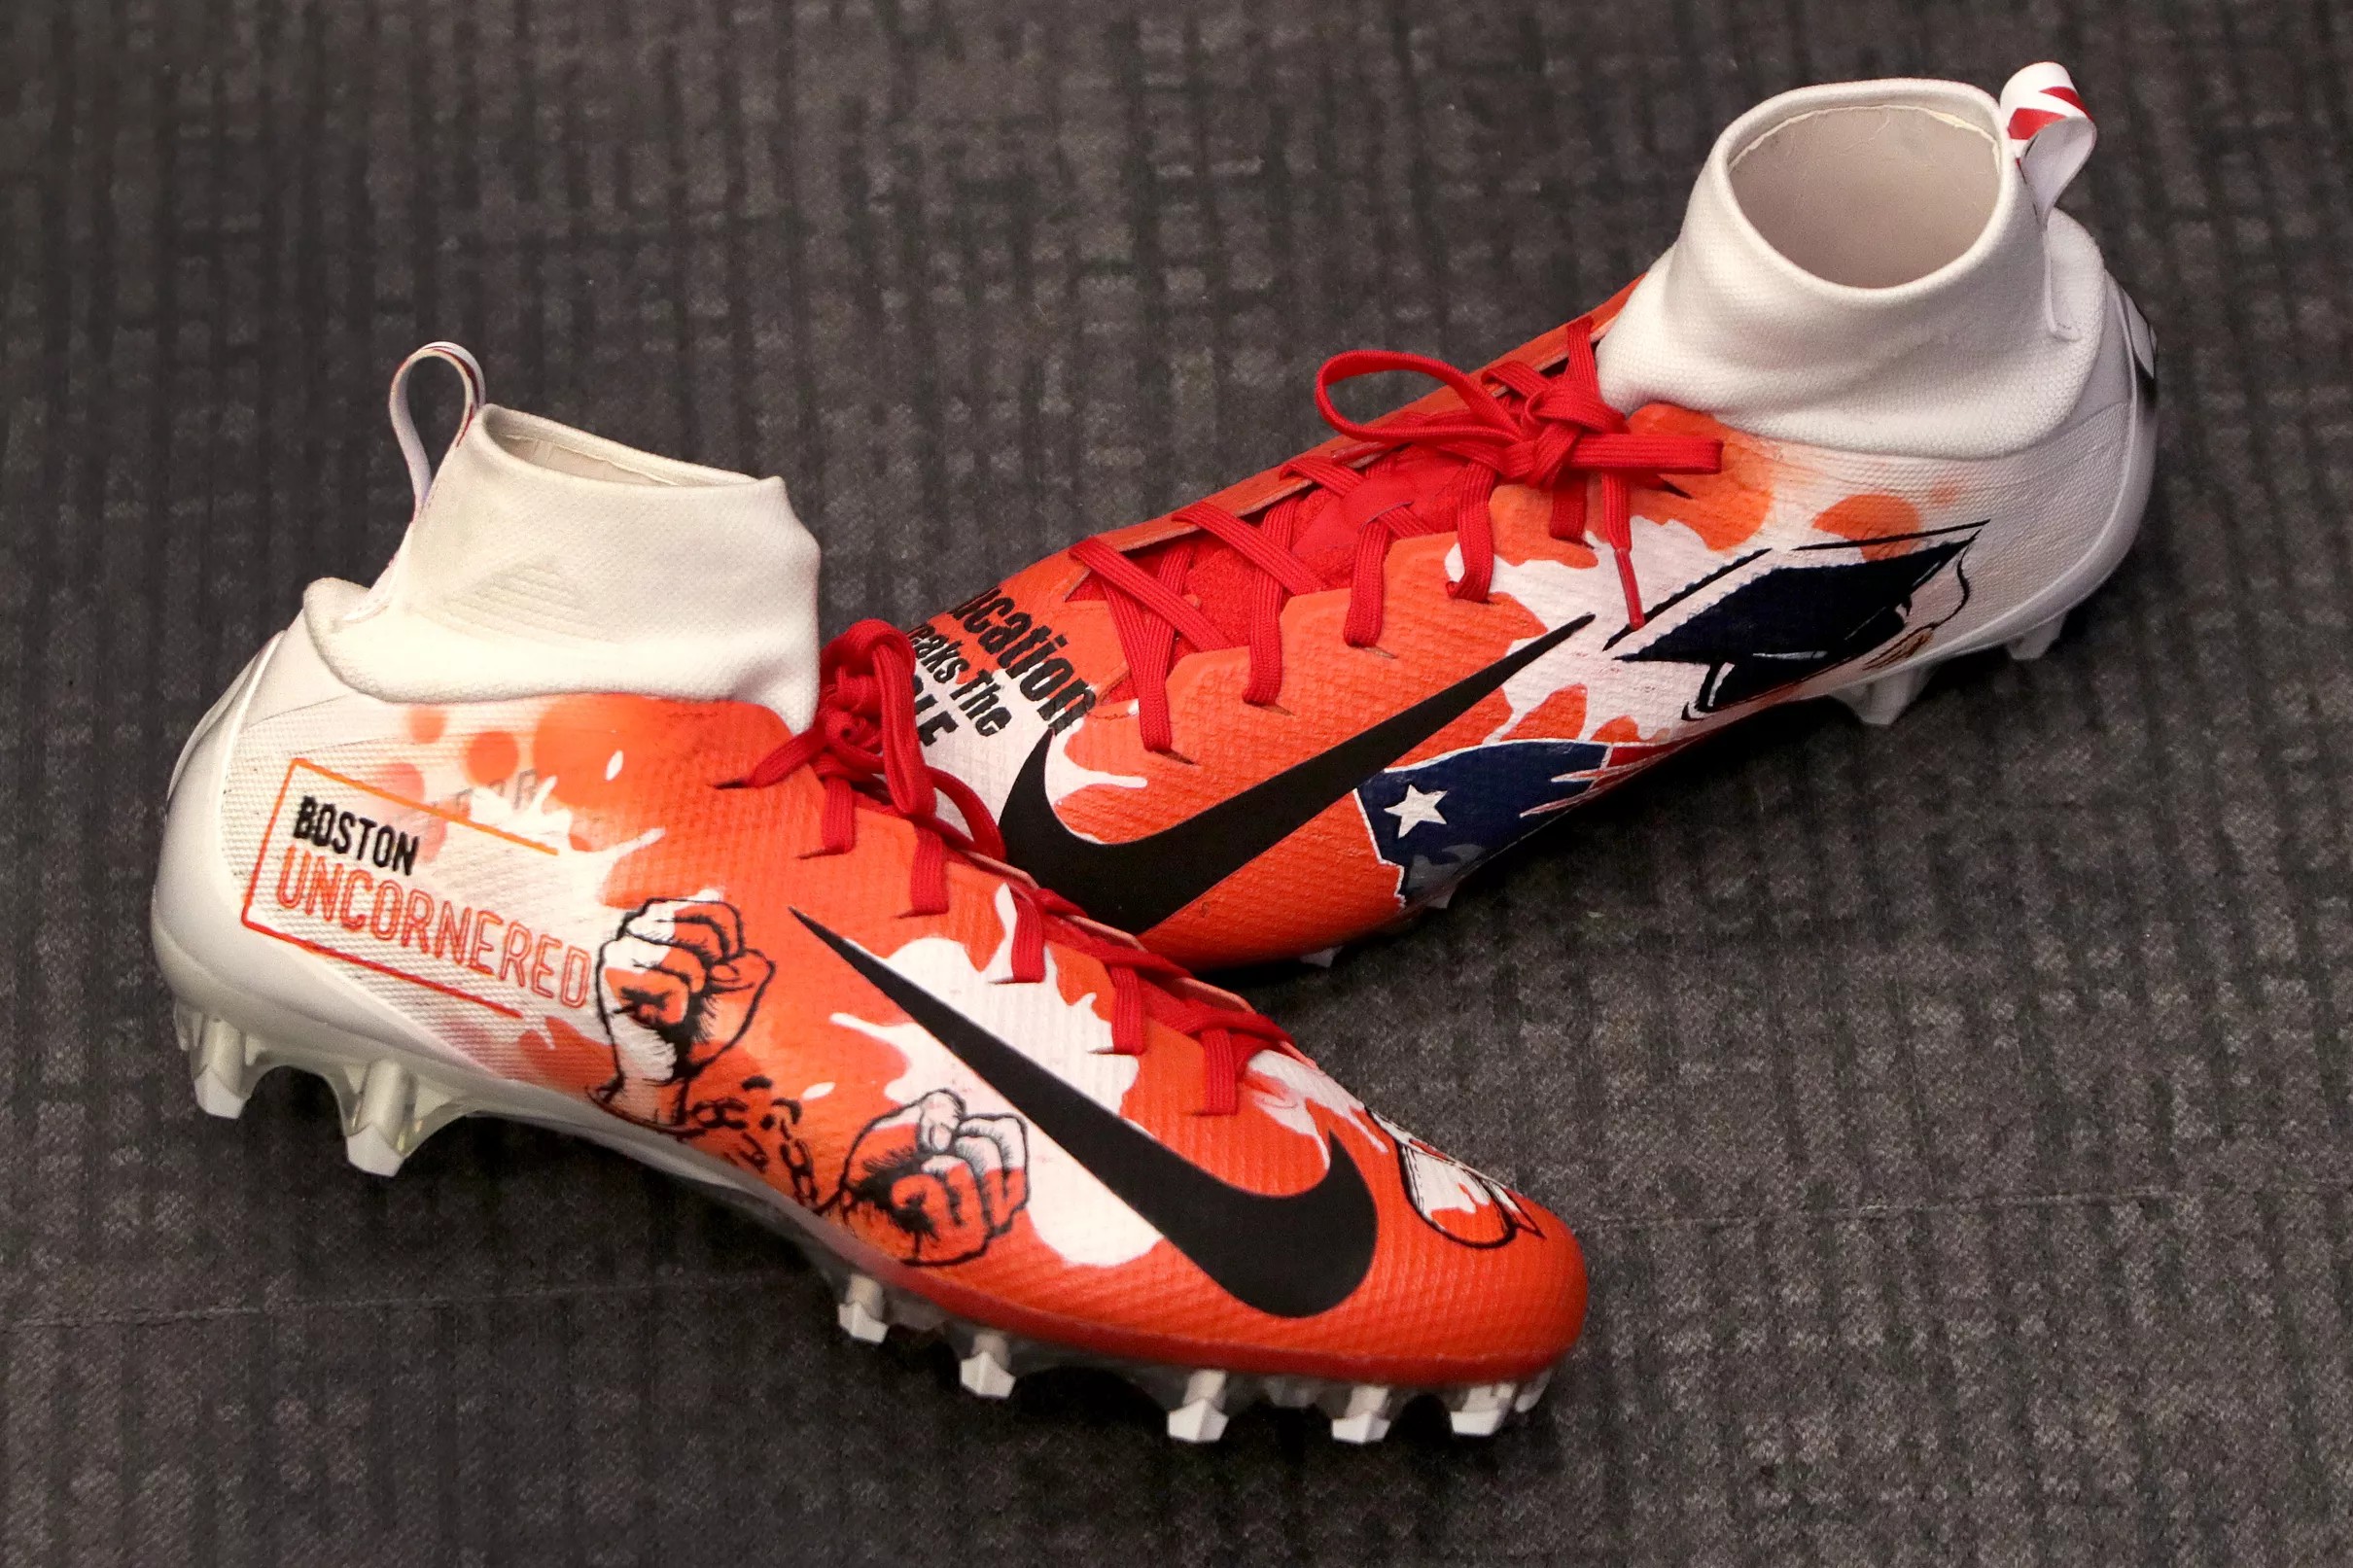 customized cleats